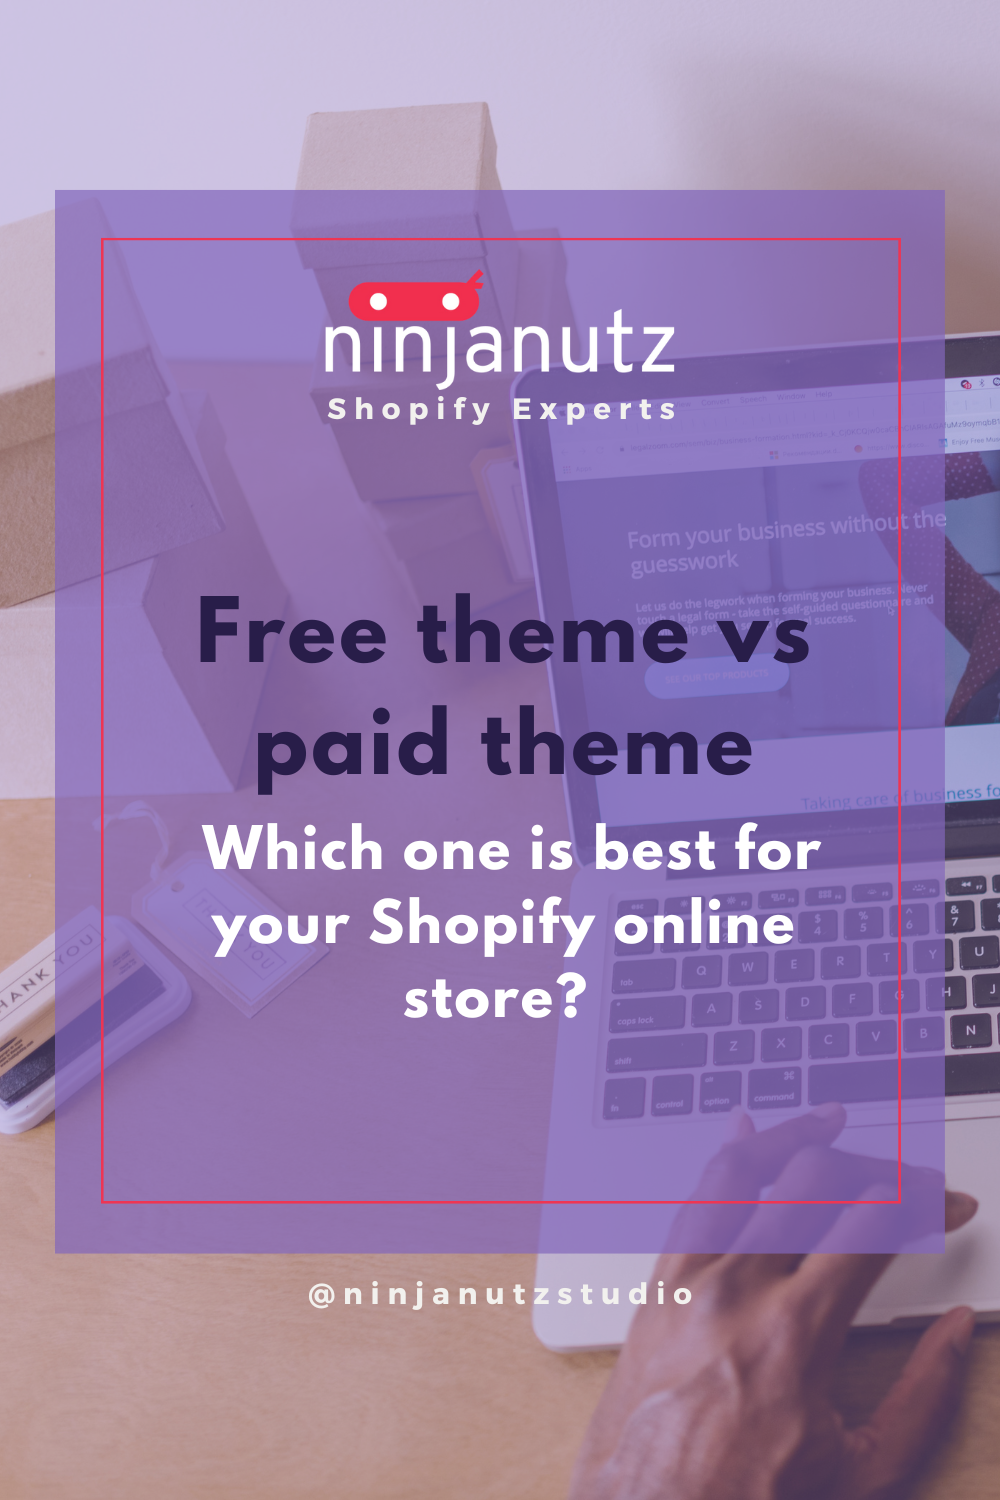 Free theme vs paid theme, which one is best for your Shopify online store? NinjaNutz®